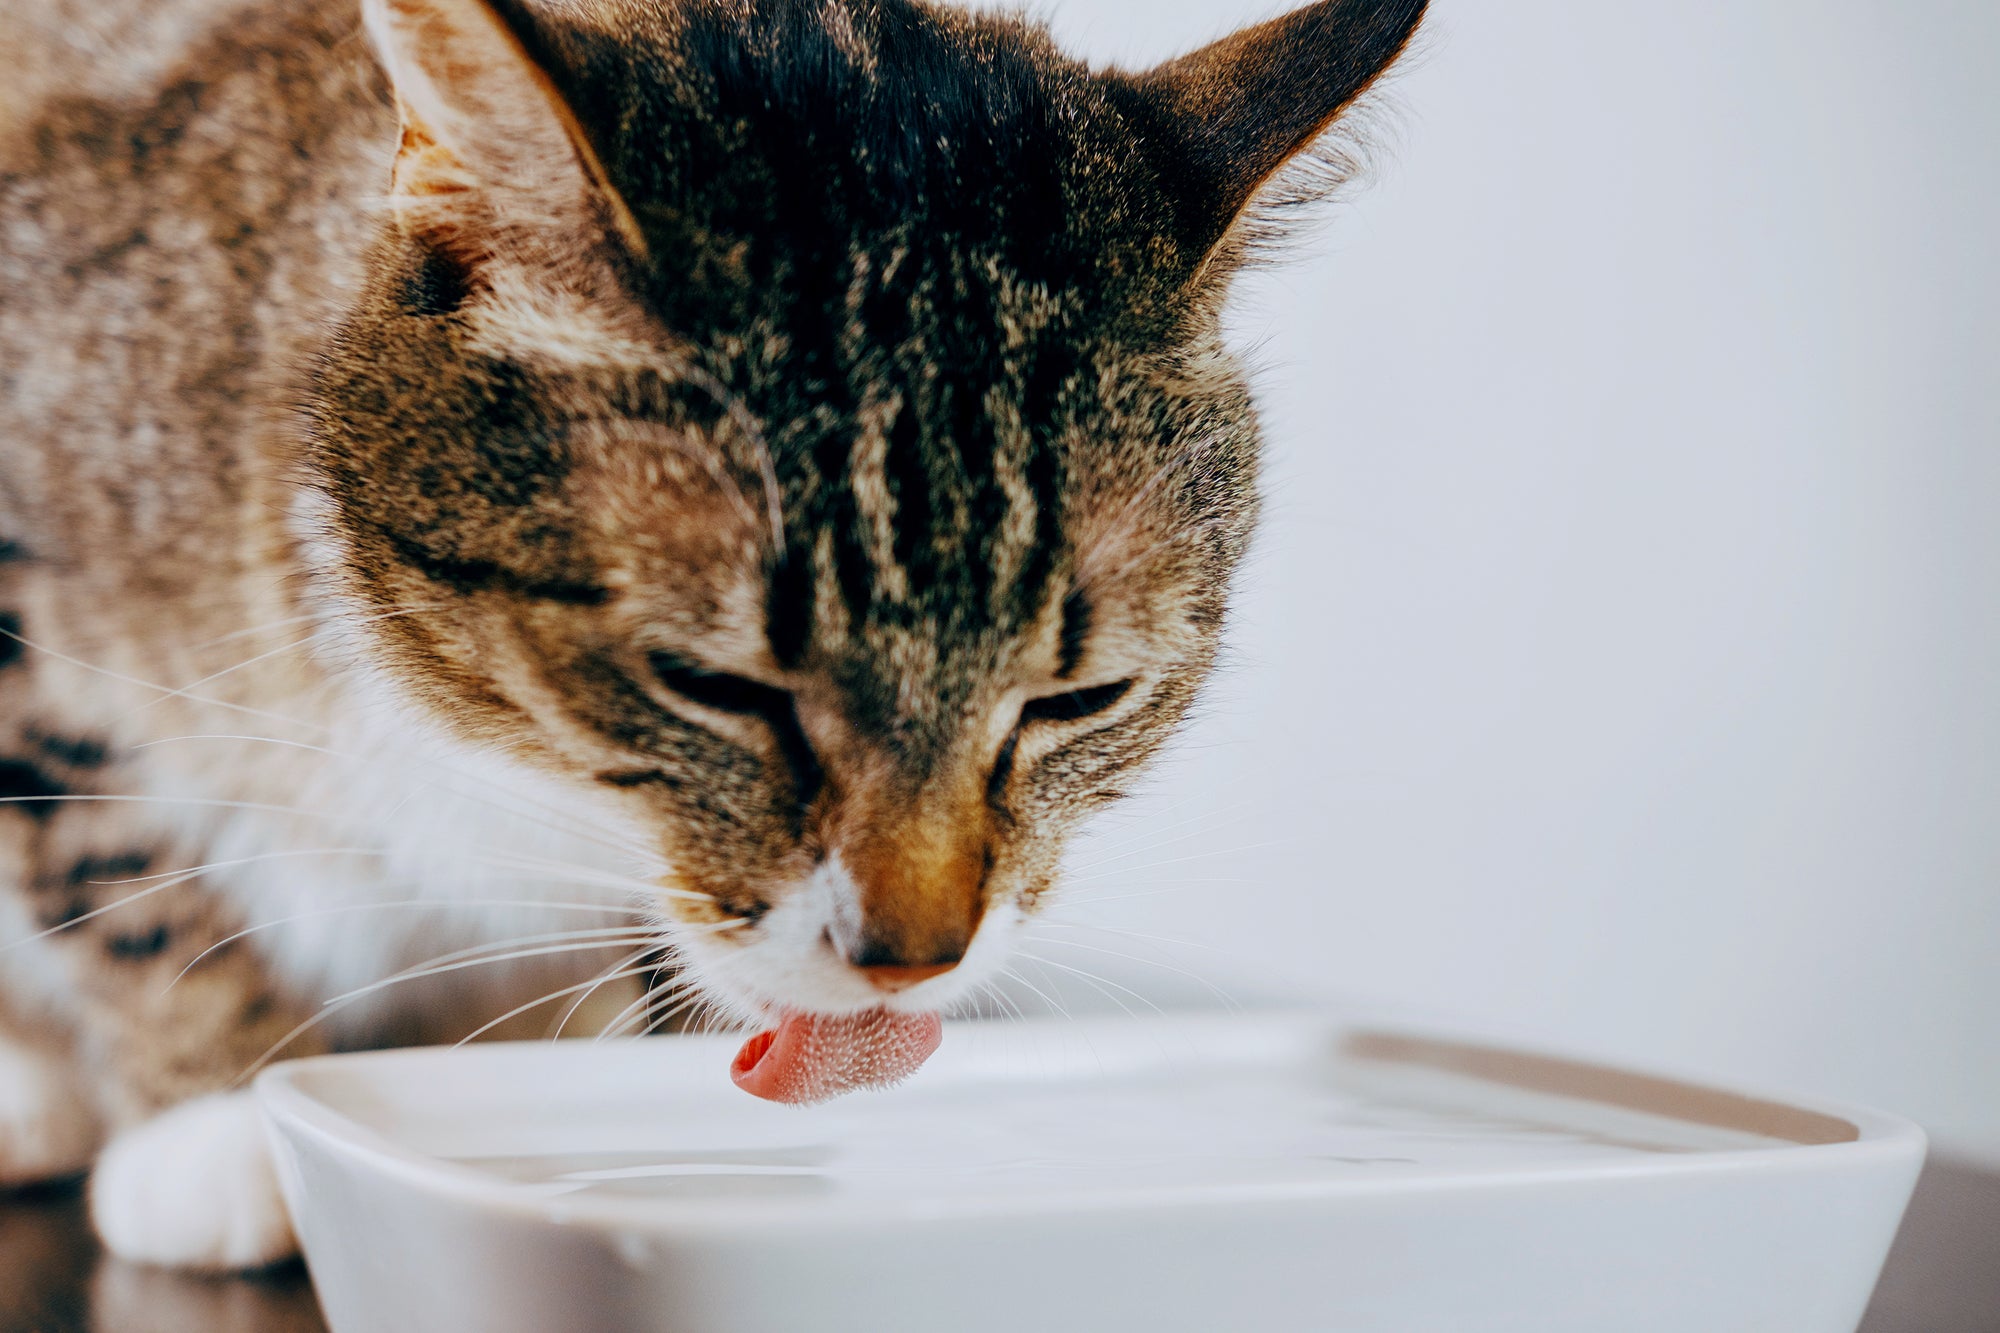 A cat drinking water from a bowl, close-up.